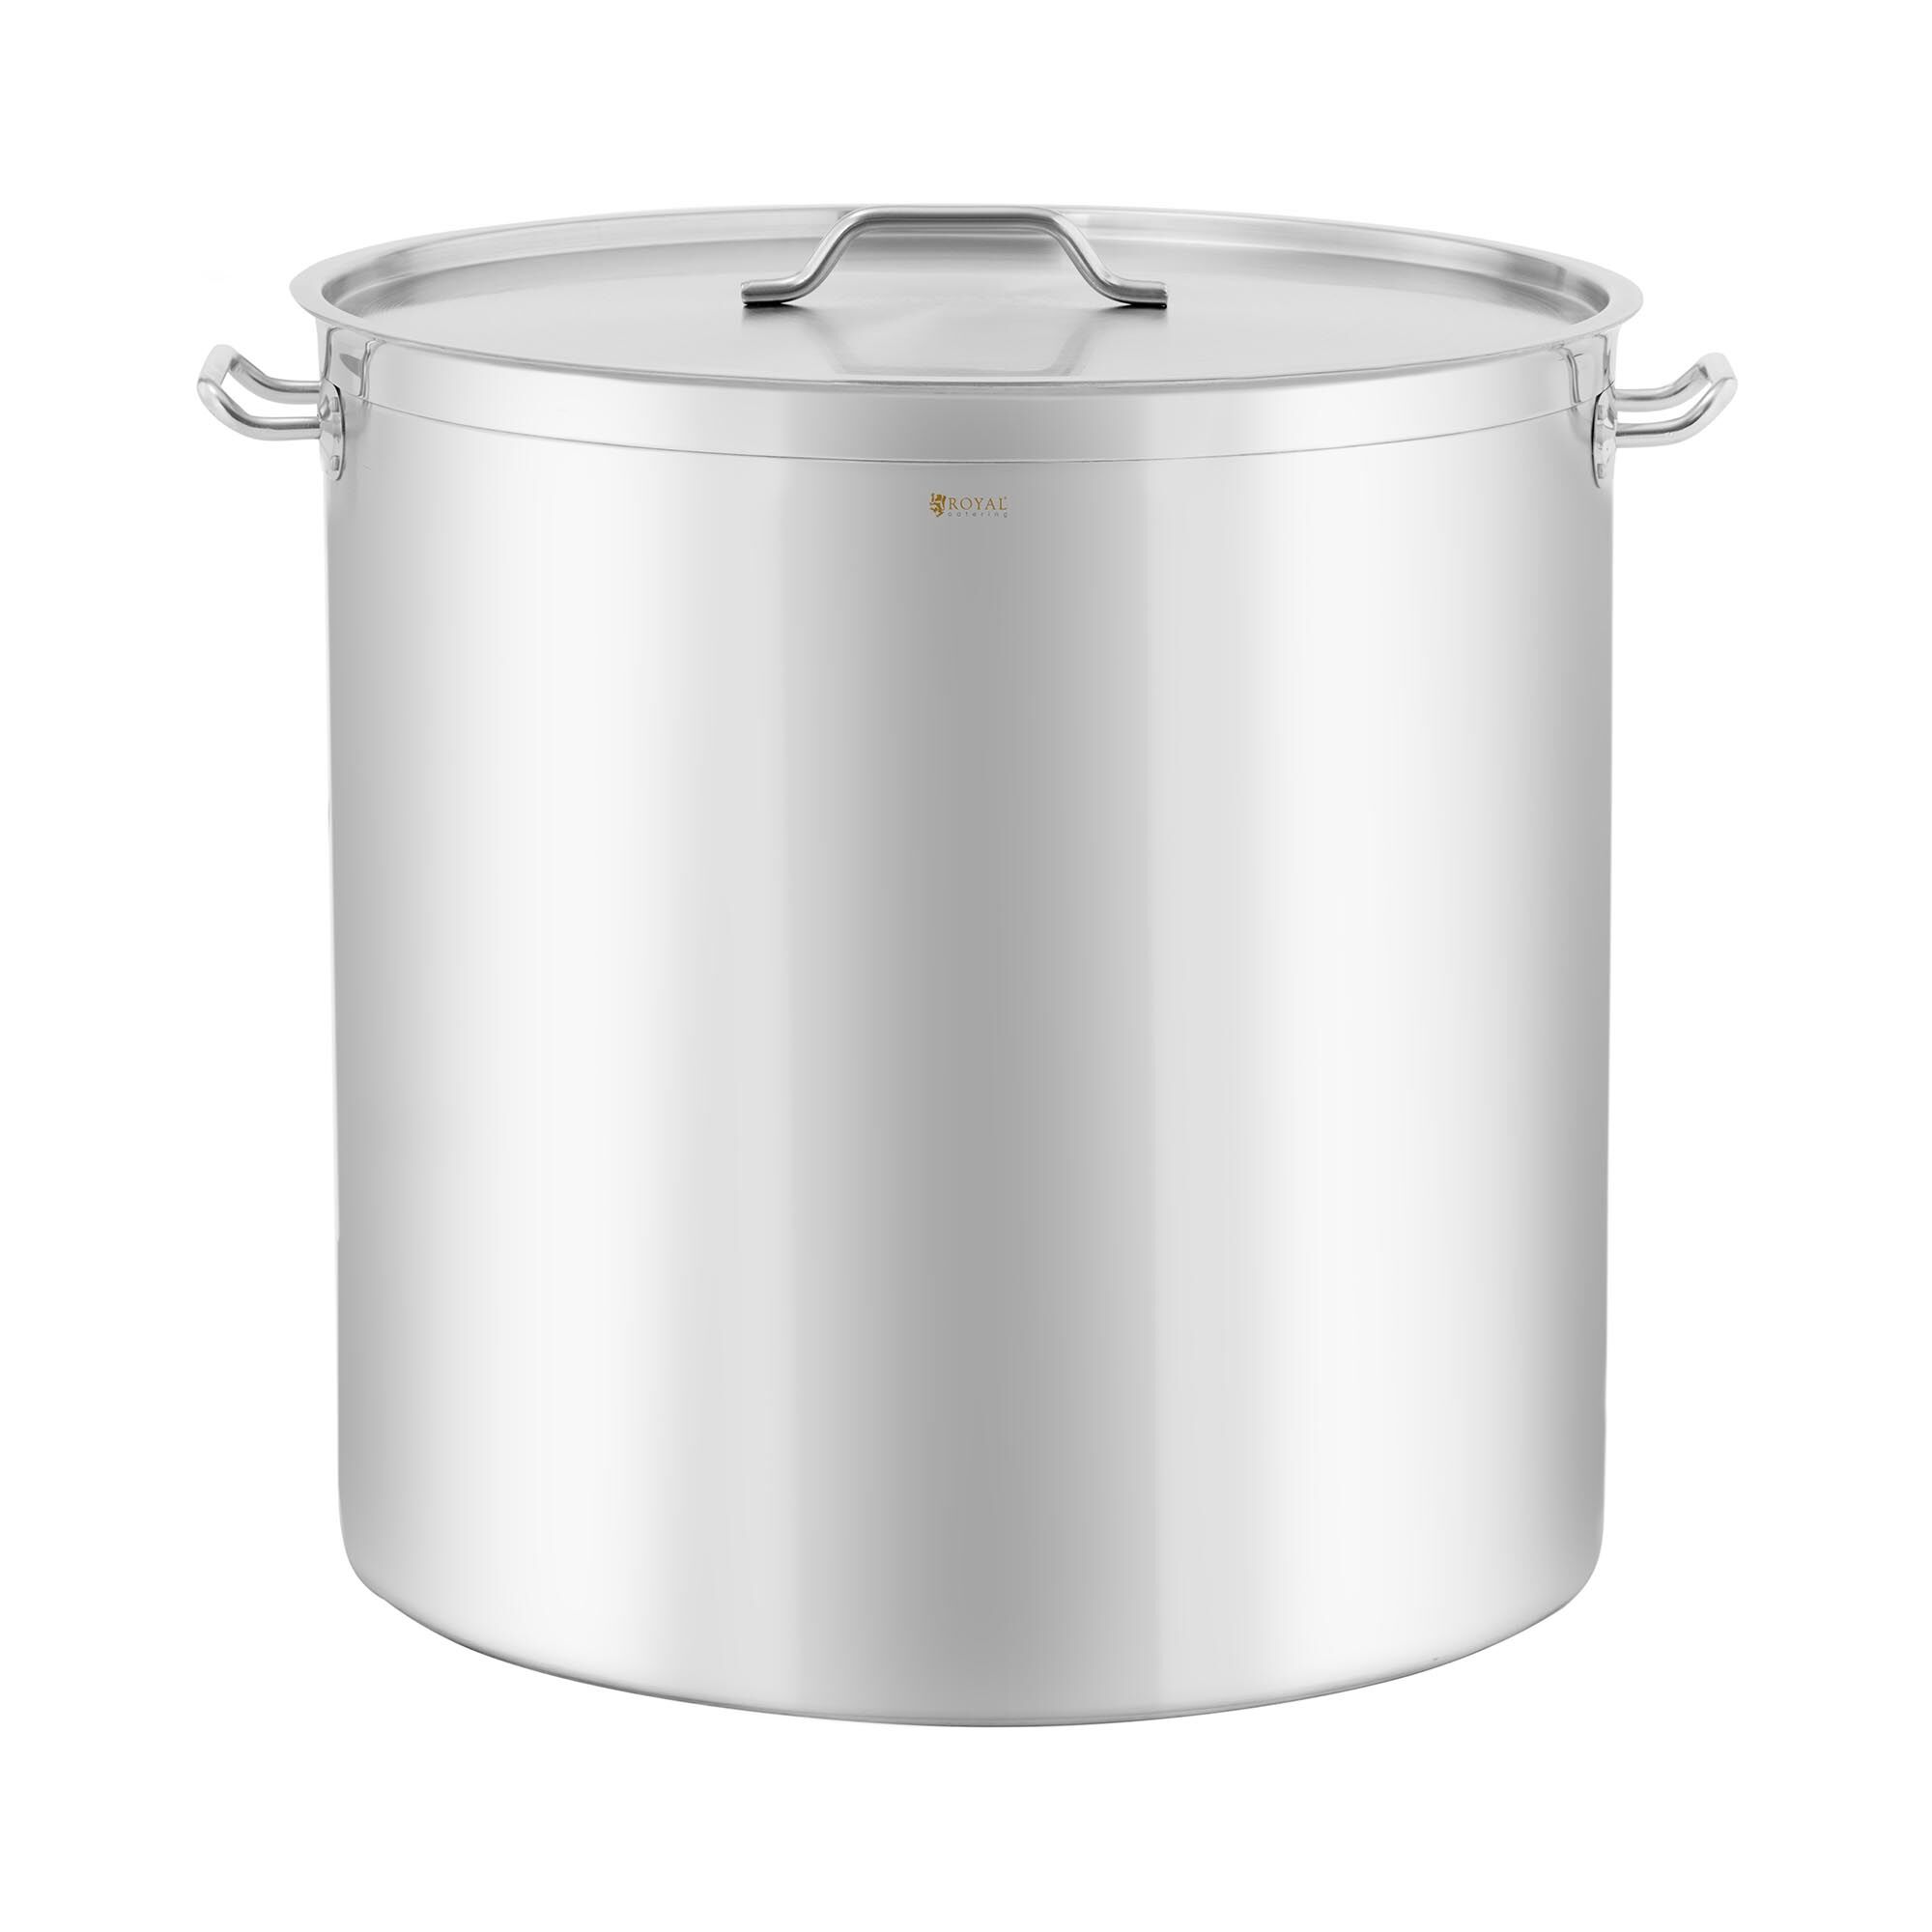 Royal Catering Induction Cooking Pot - 170 L - Royal Catering - 600 mm